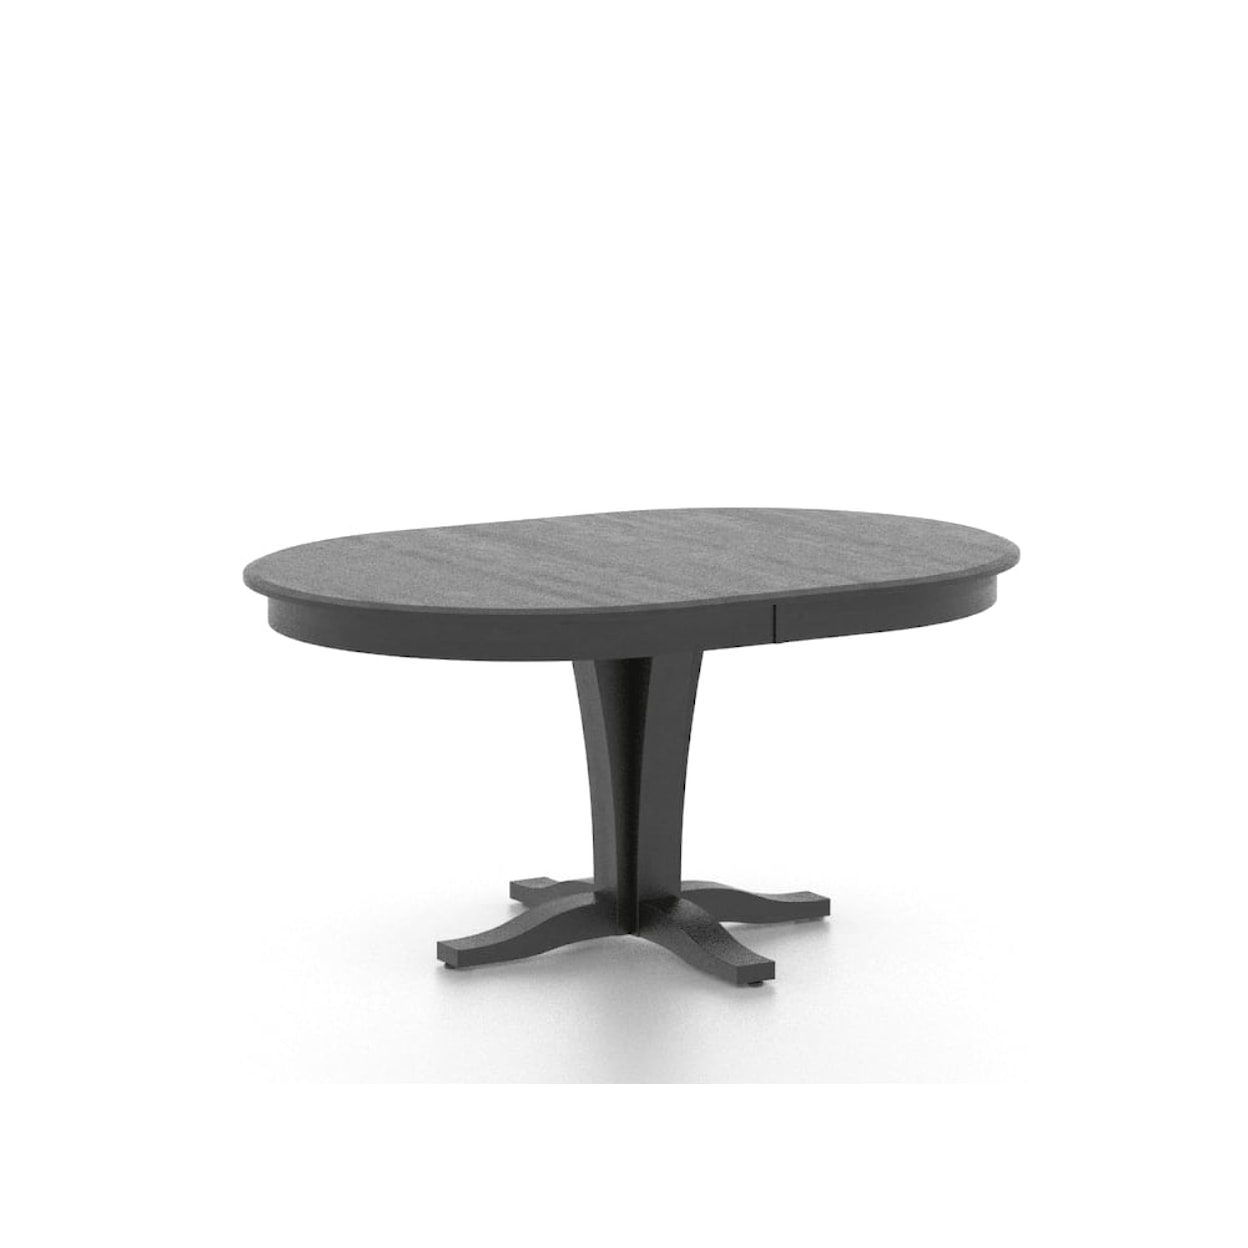 Canadel Gourmet Customizable Oval Table